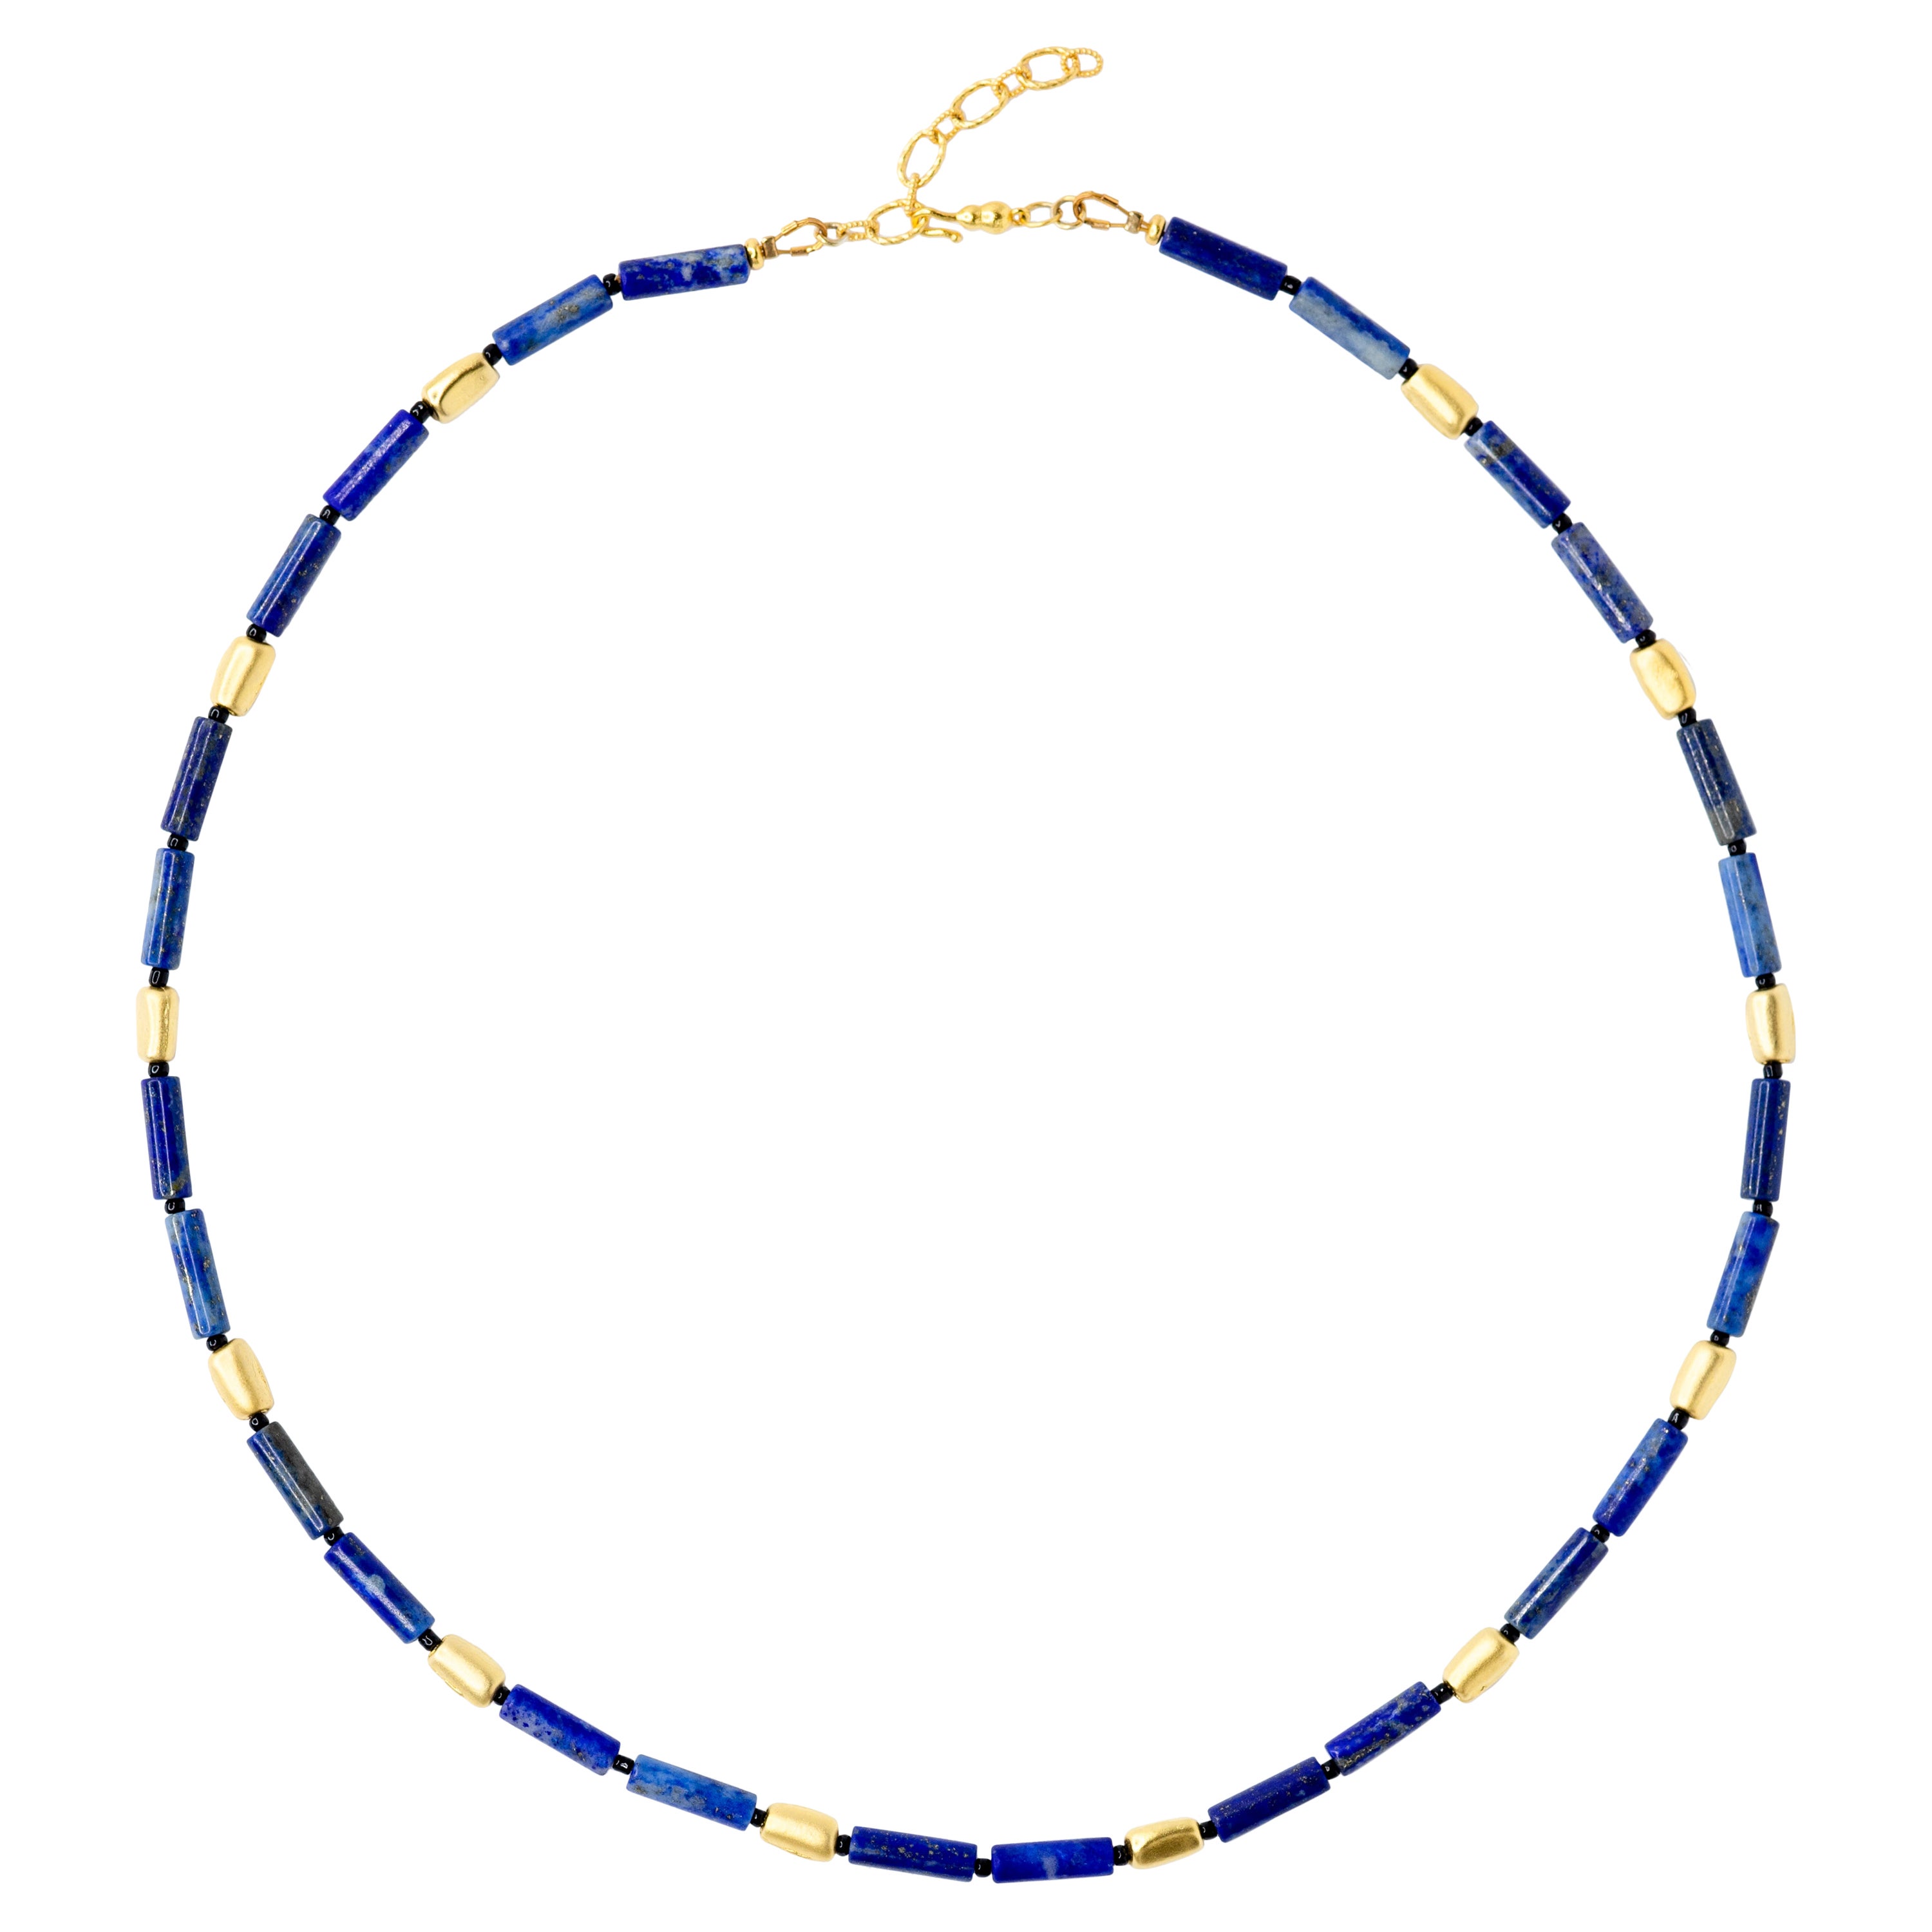 This necklace is crafted from Lapis Lazuli Beads and Gold Plated Brass Beads, inspired by Salvador Dali's Famous Painting 